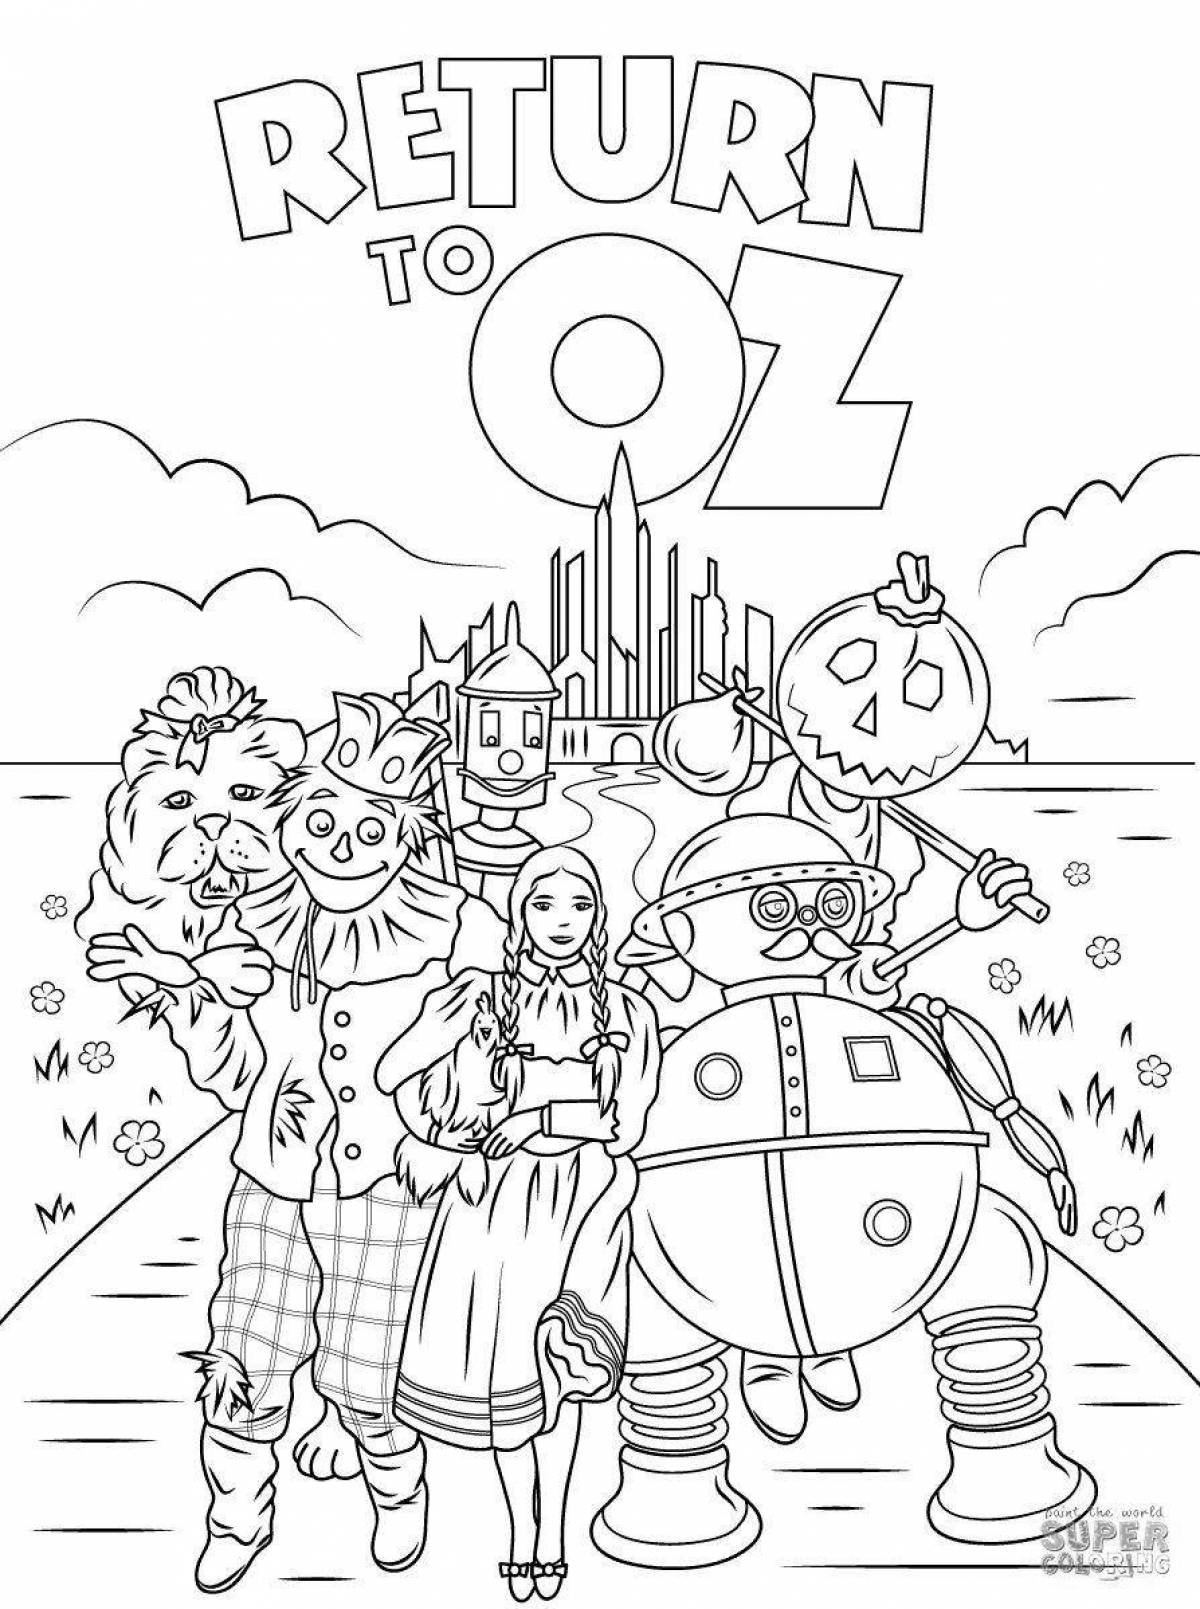 Ellie's holiday coloring page